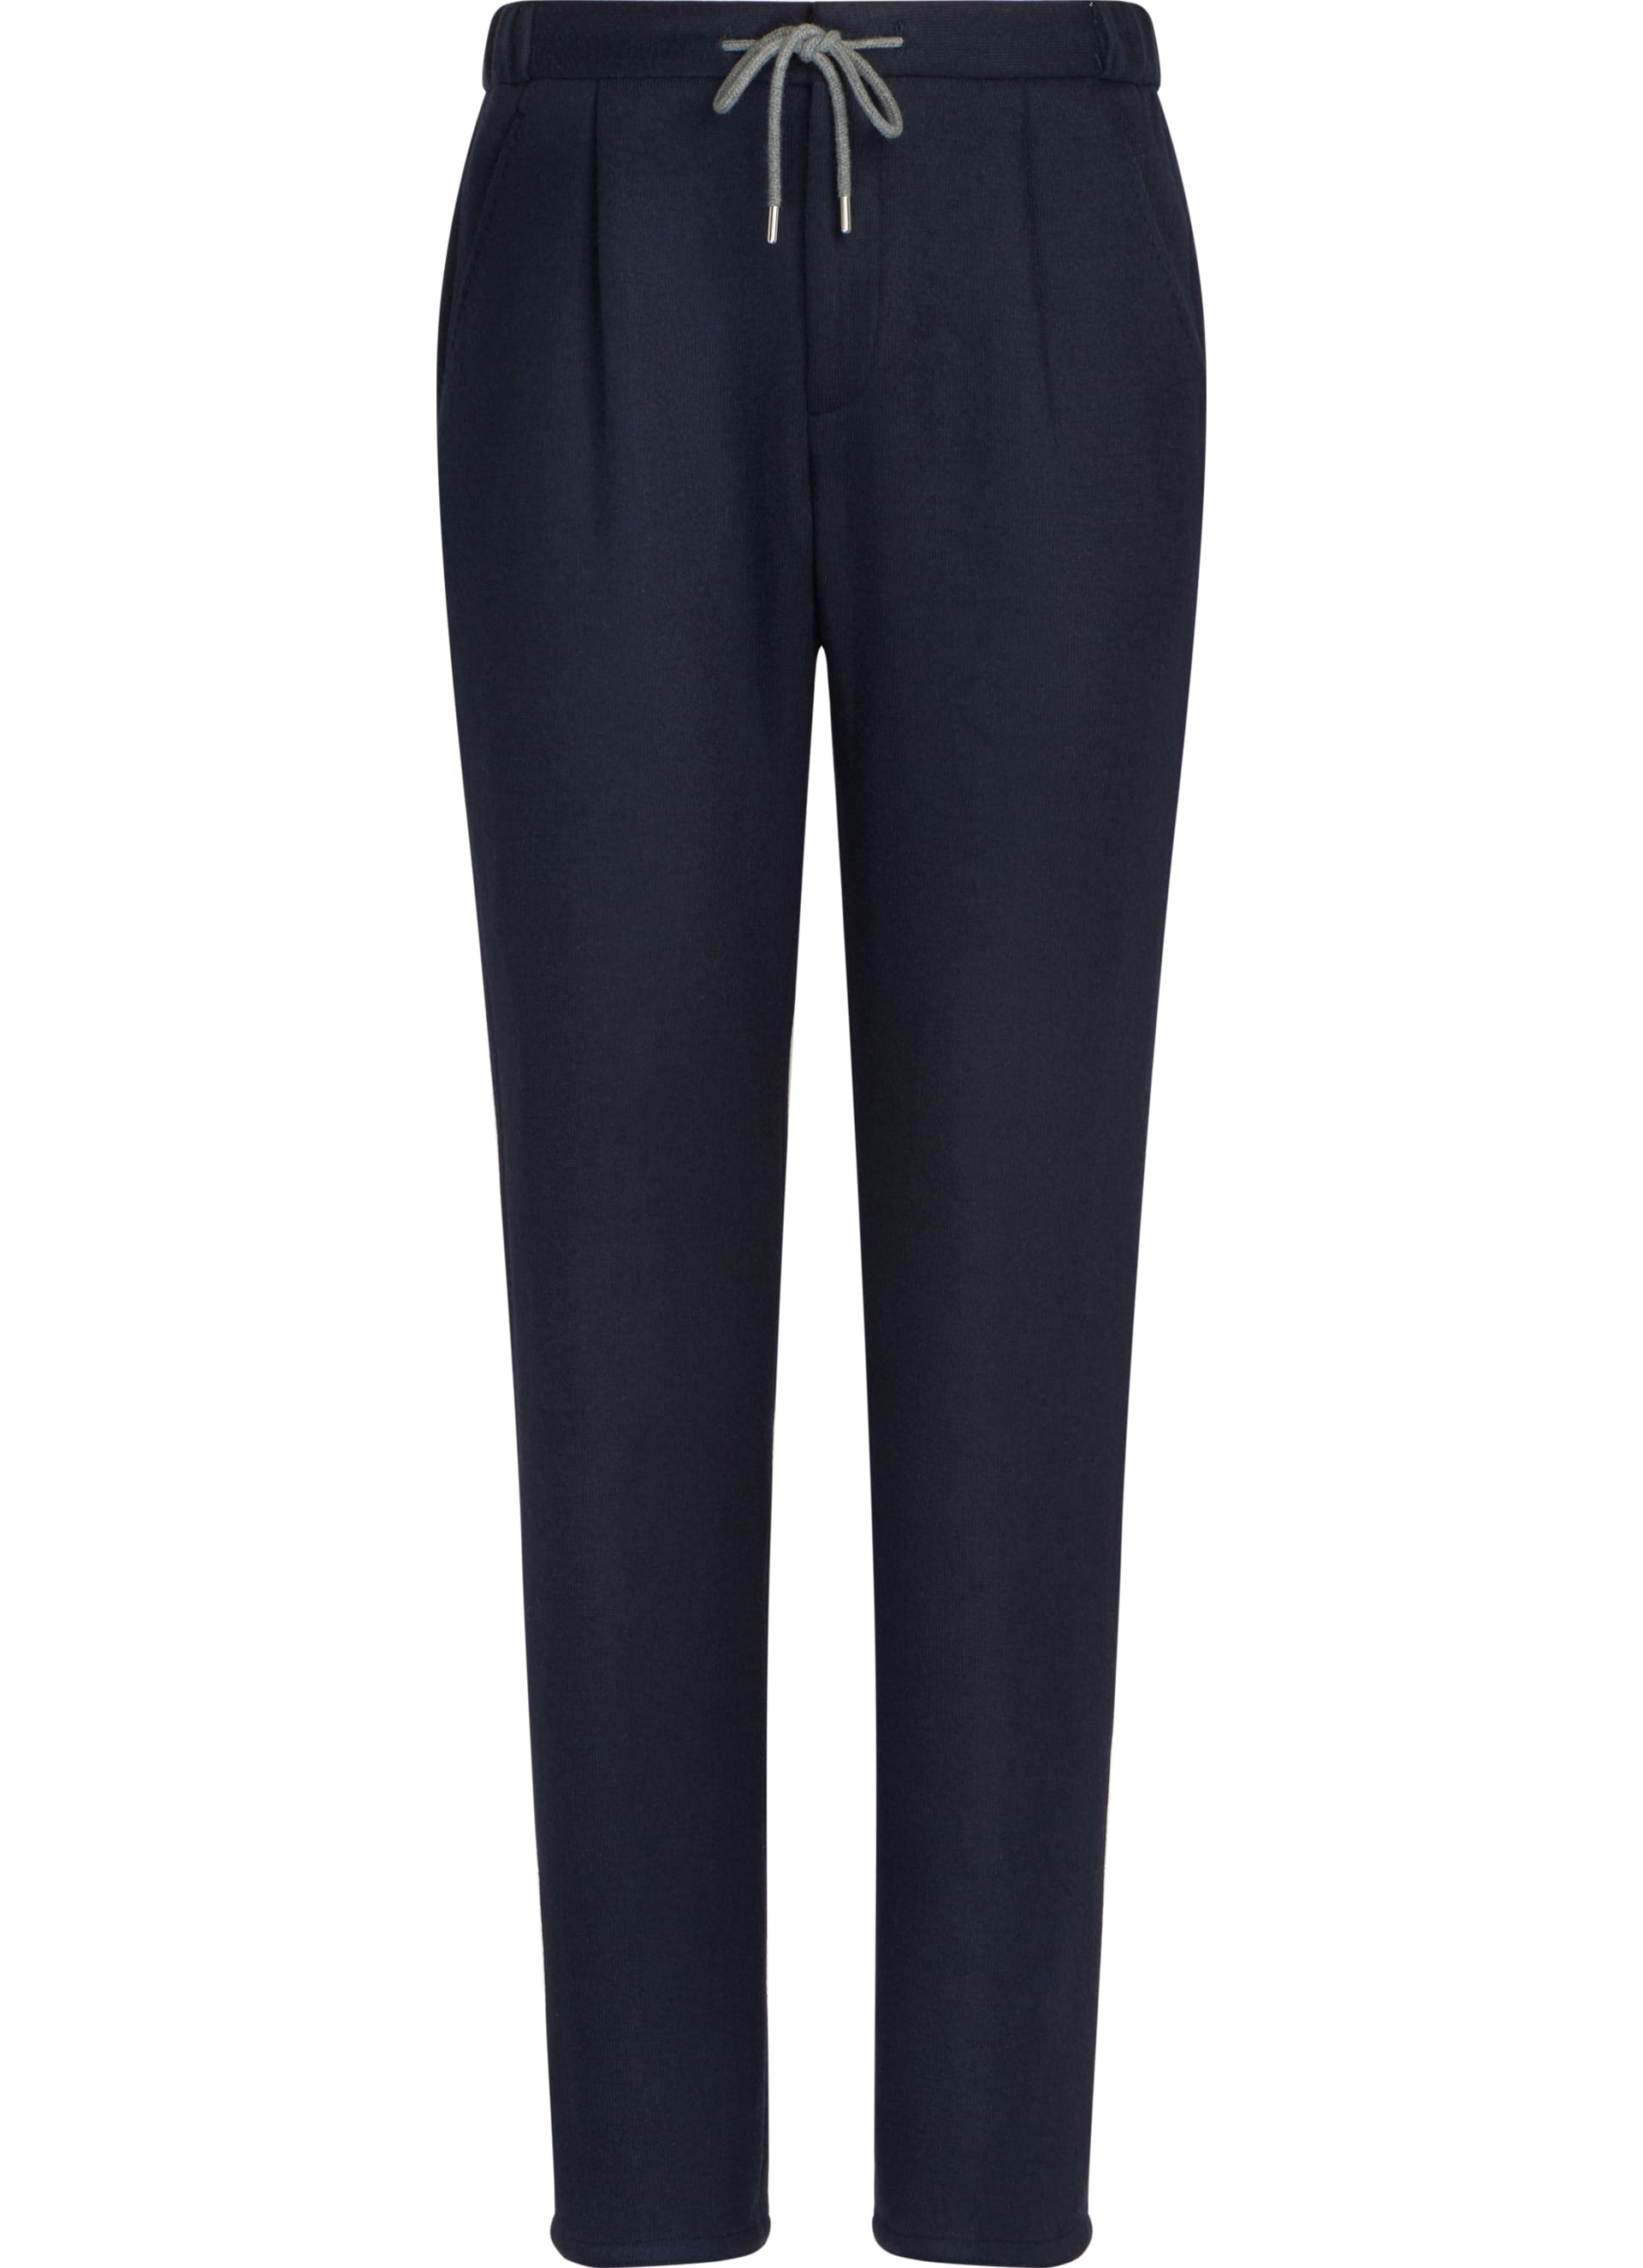 Navy Ames Pleat Trousers B5532i | Suitsupply Online Store